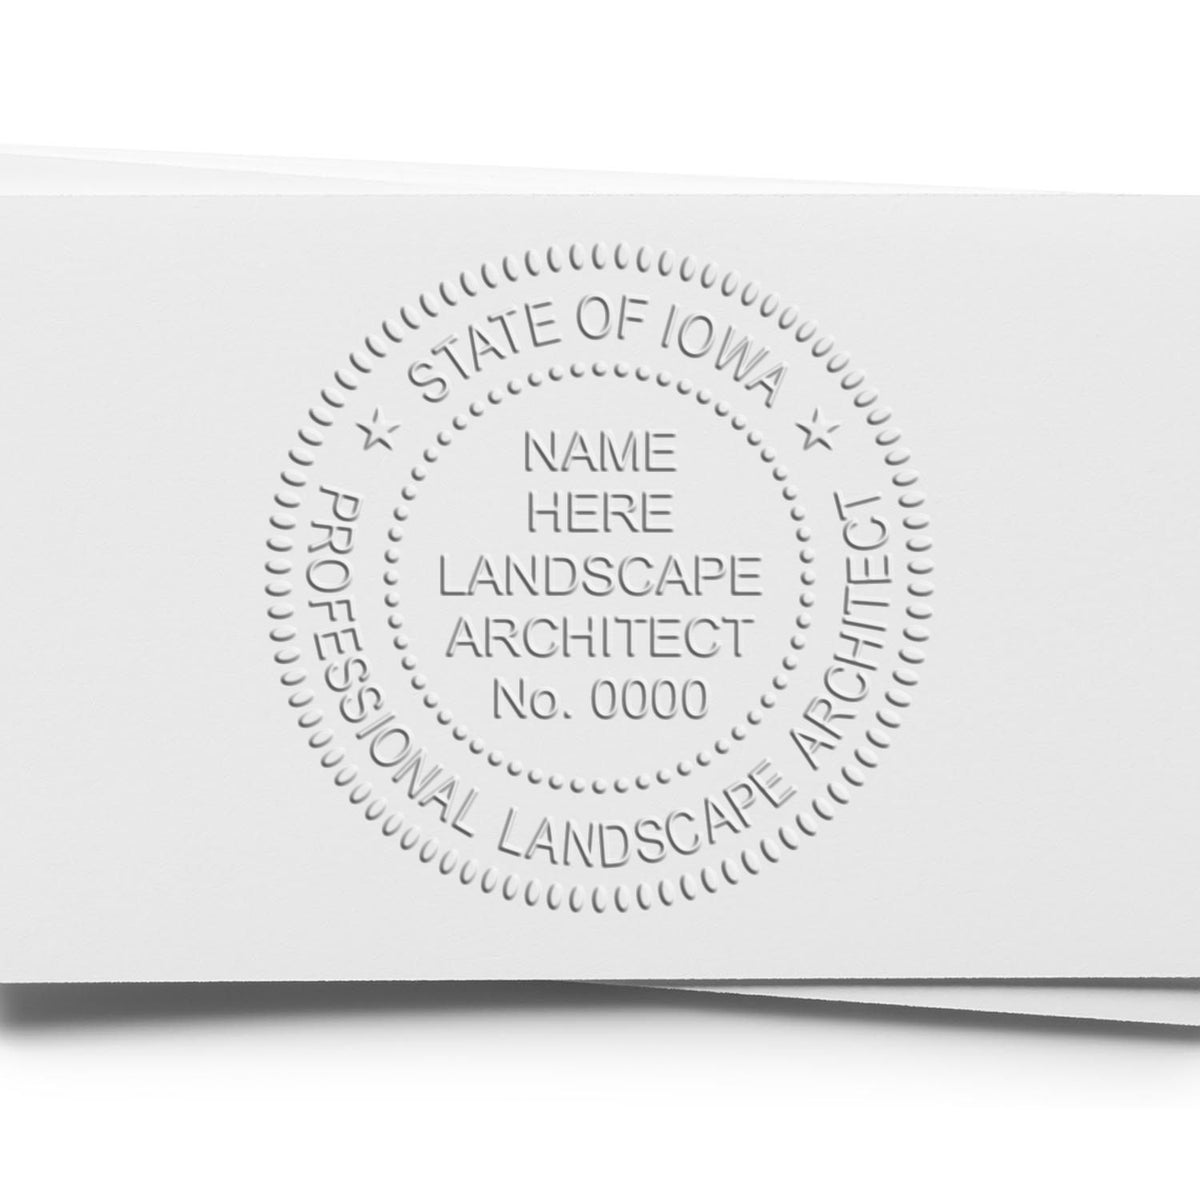 The Gift Iowa Landscape Architect Seal stamp impression comes to life with a crisp, detailed image stamped on paper - showcasing true professional quality.